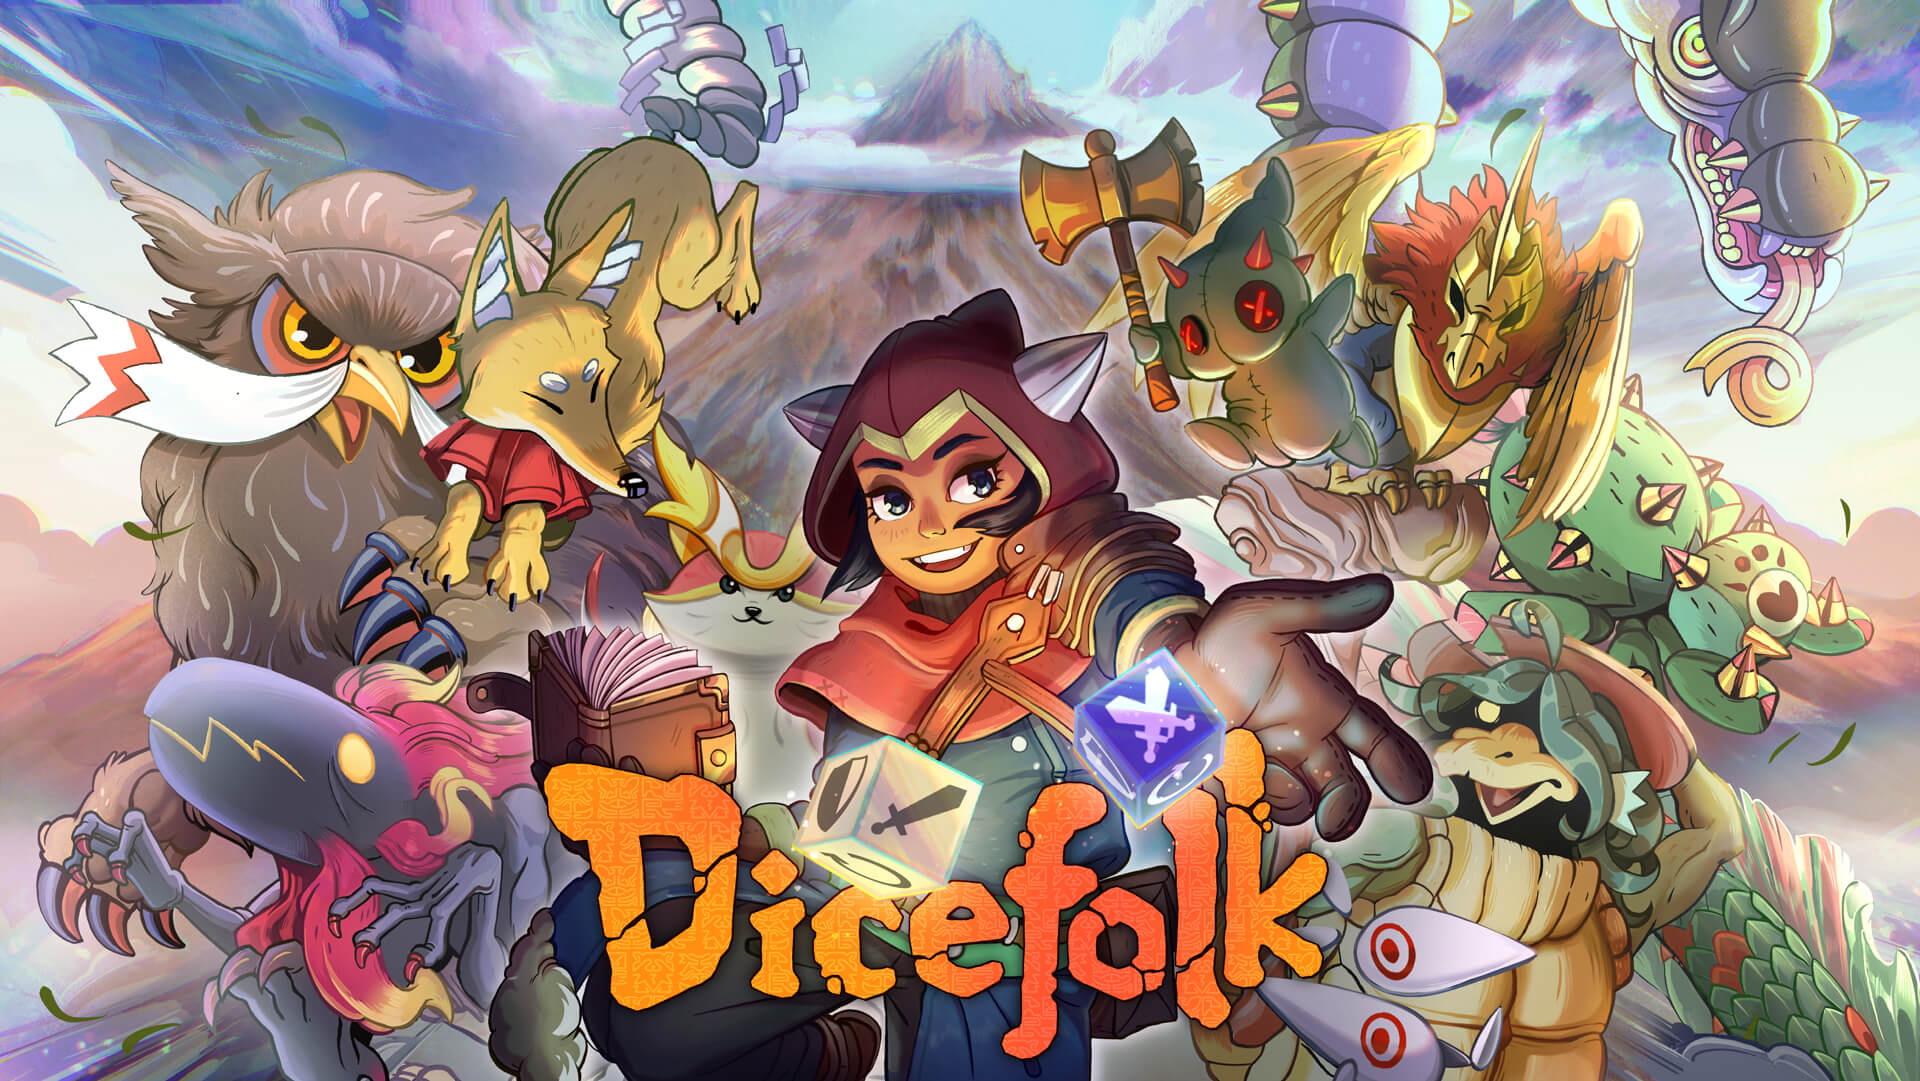 Roll The Dice & Befriend Magical Beasts In The Dice-Based Tactical Roguelike Dicefolk Available Now on Nintendo Switch